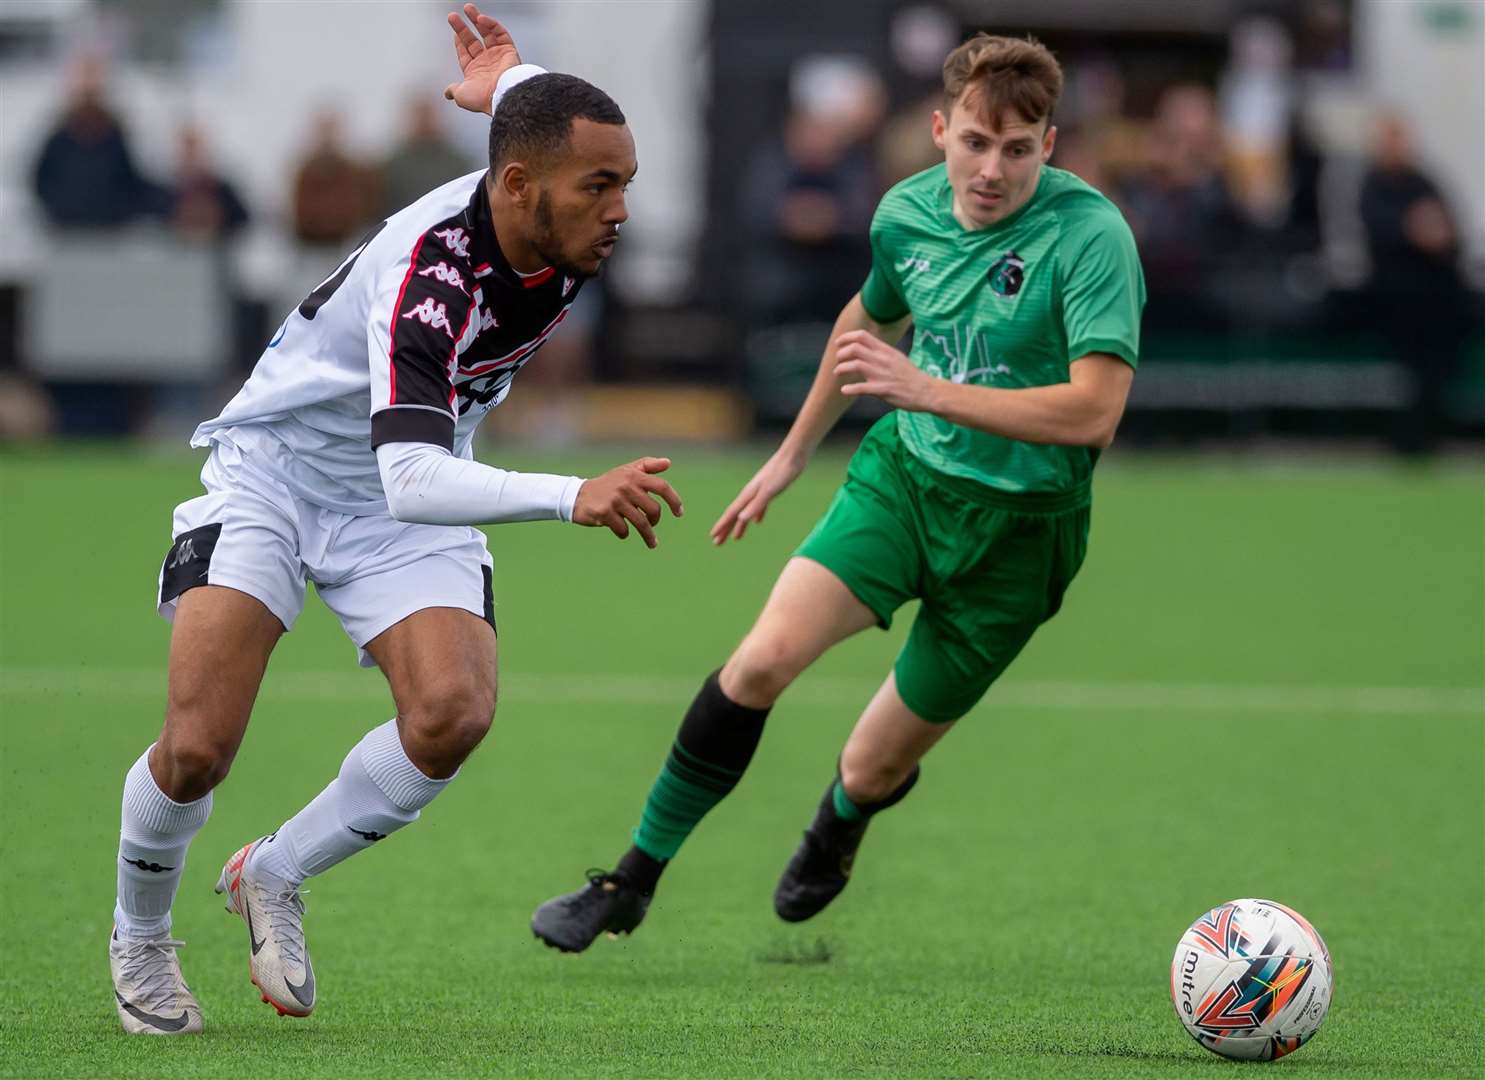 Tariq Ossai takes the game to Welling Town last weekend. Picture: Ian Scammell